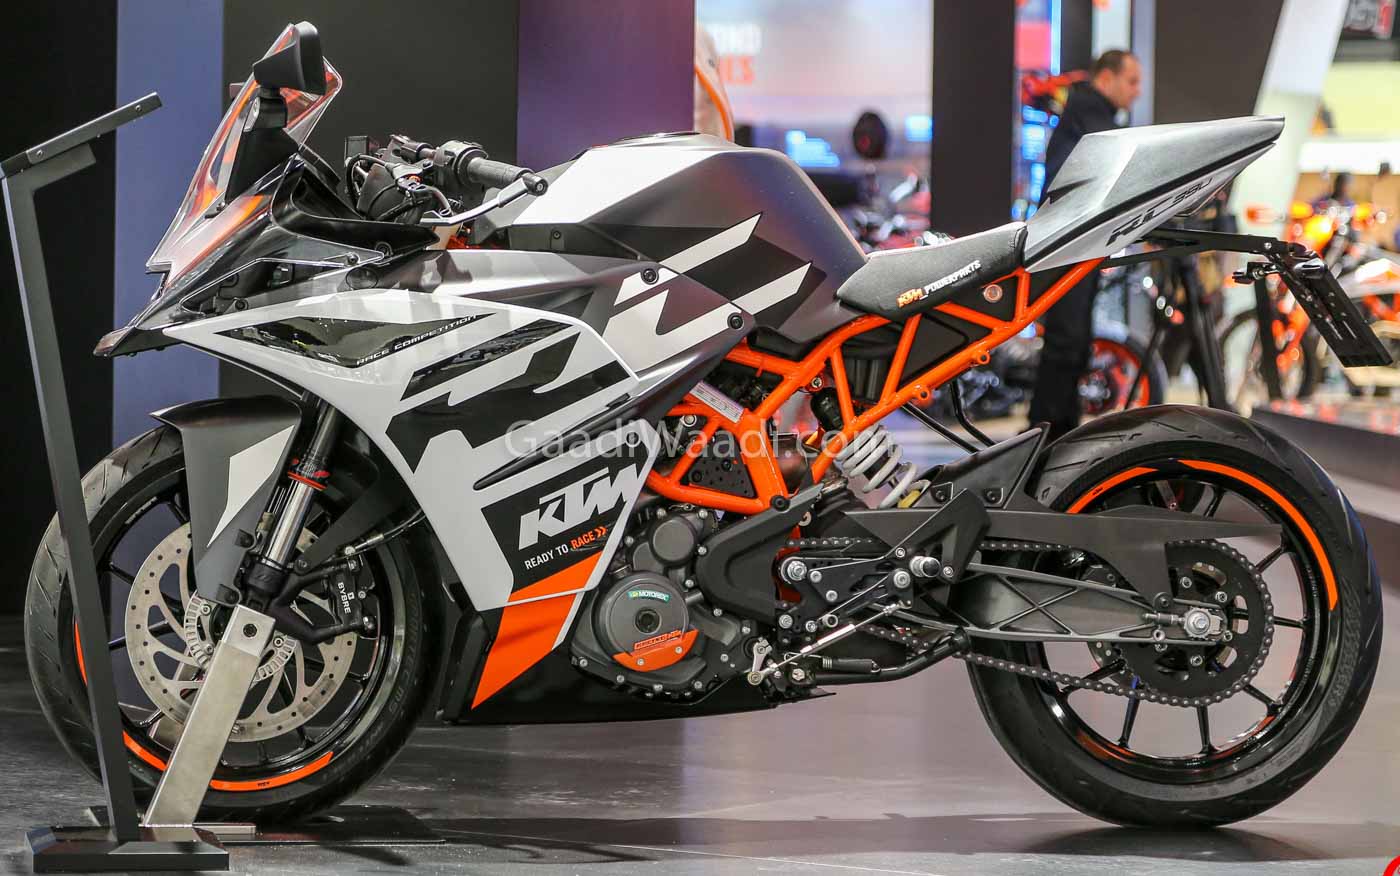 KTM RC 390 Image Leaked Online, Will Launch In India In 2021